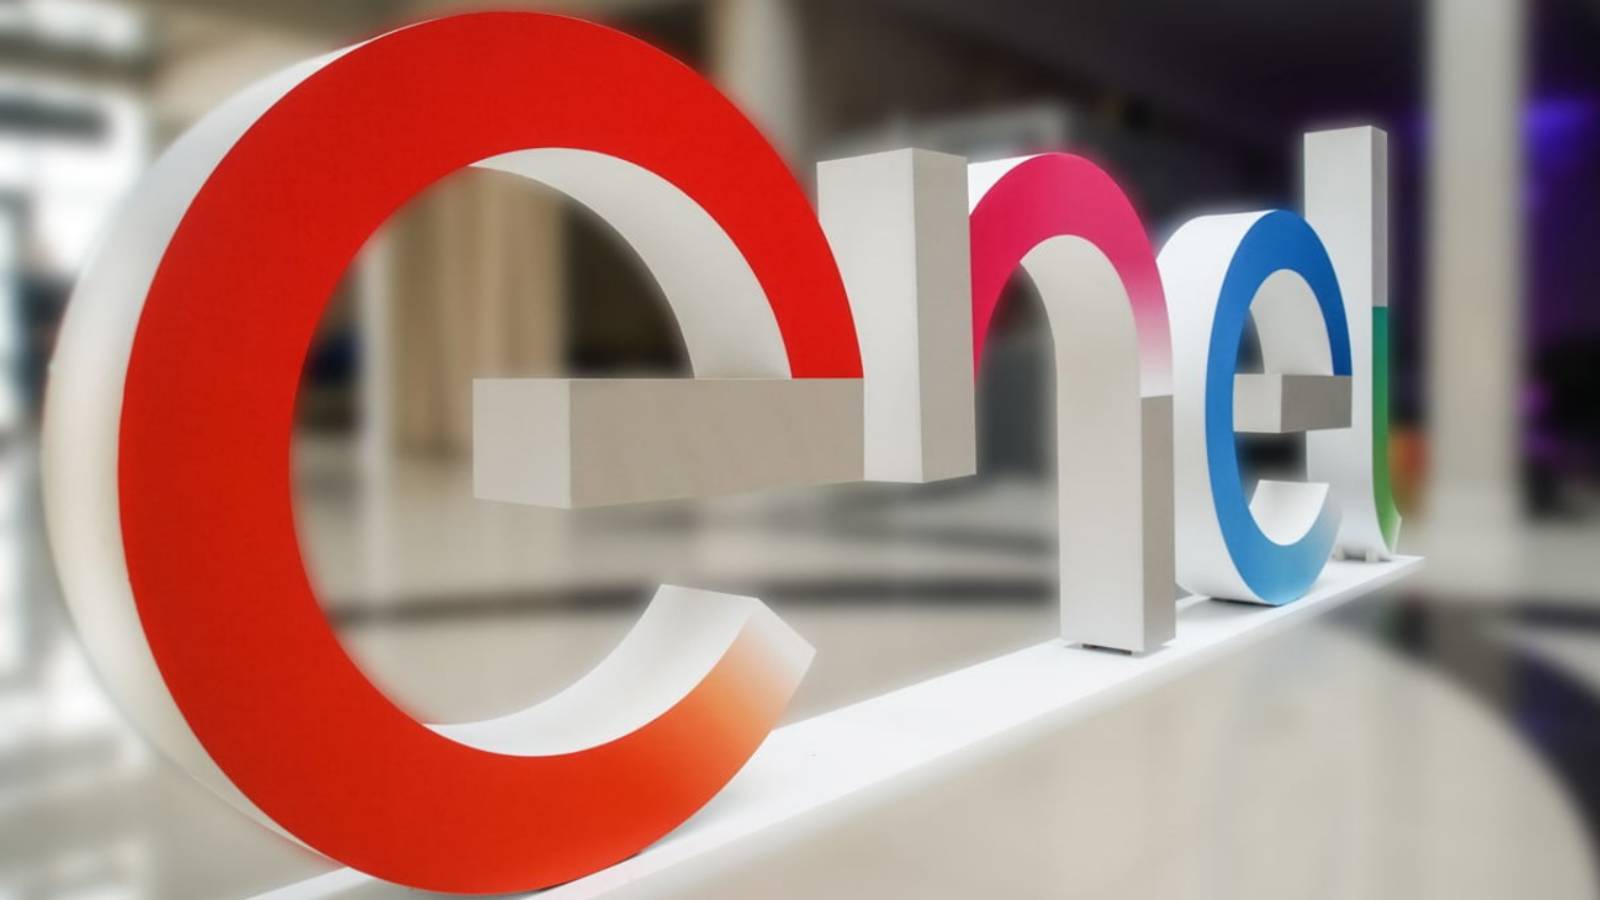 Official LAST MINUTE ENEL Decisions Target Romanian Customers